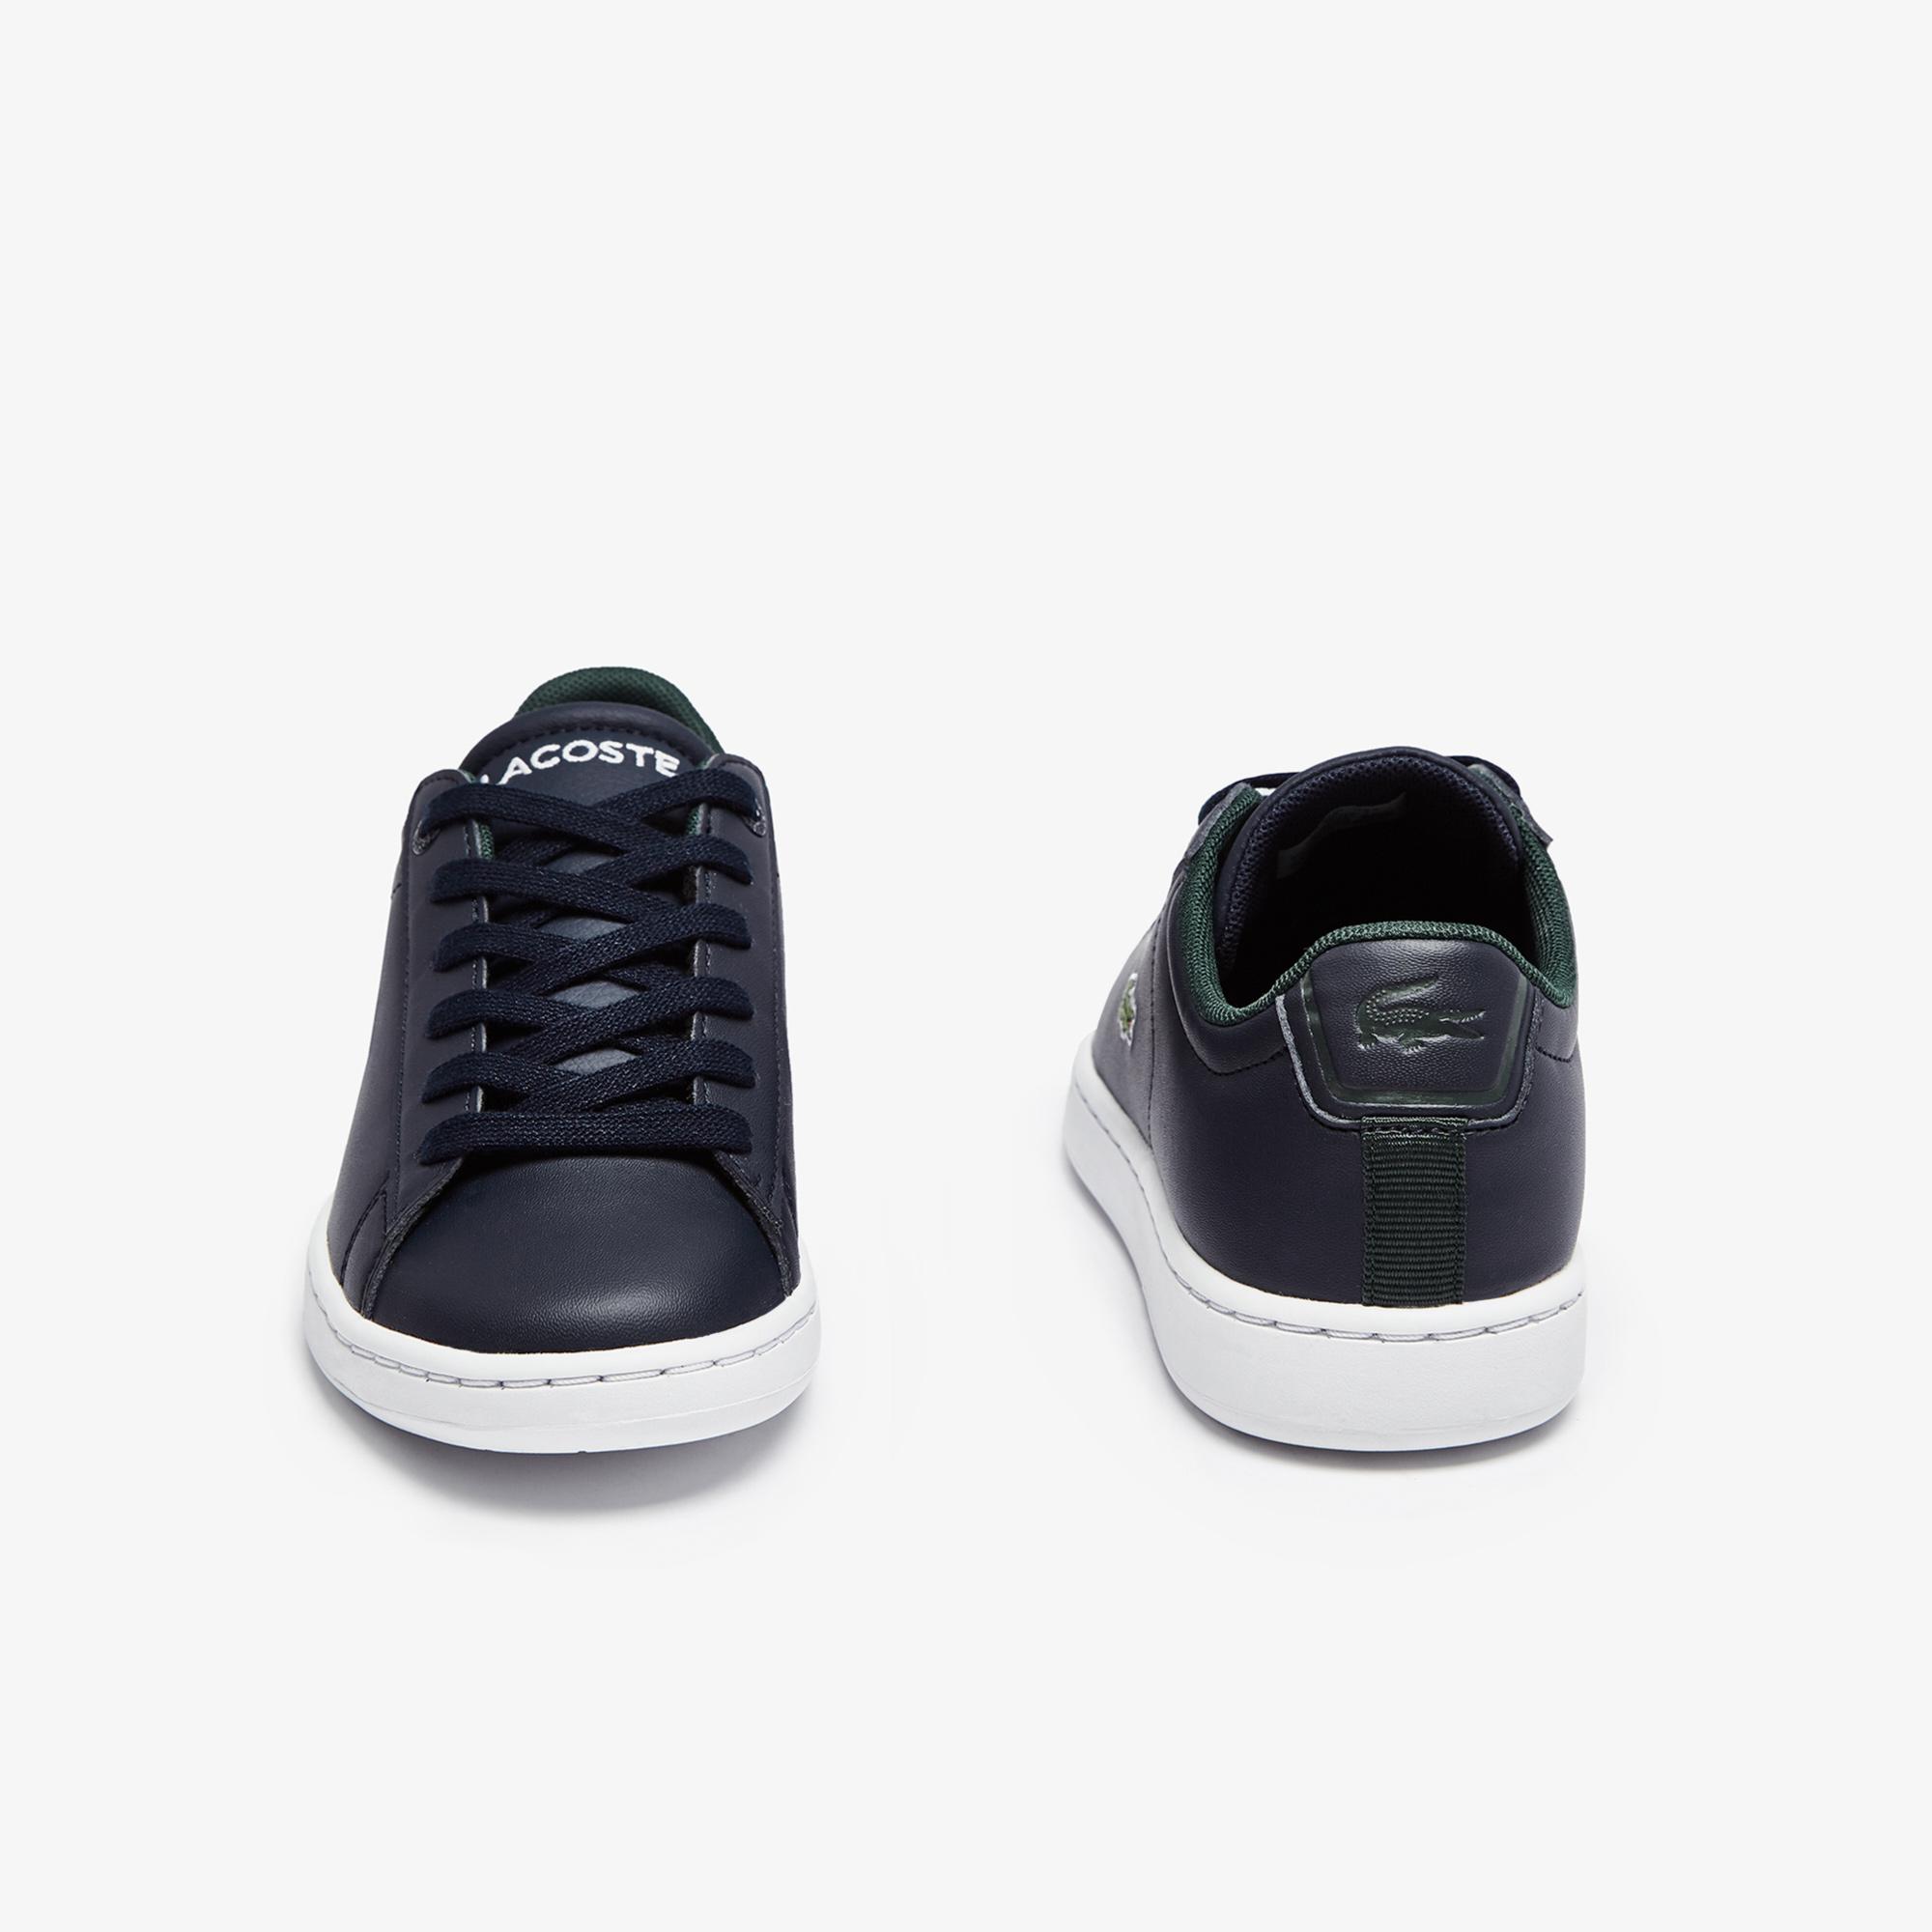 Lacoste Children's Carnaby Evo 0721 1 Suc Shoes